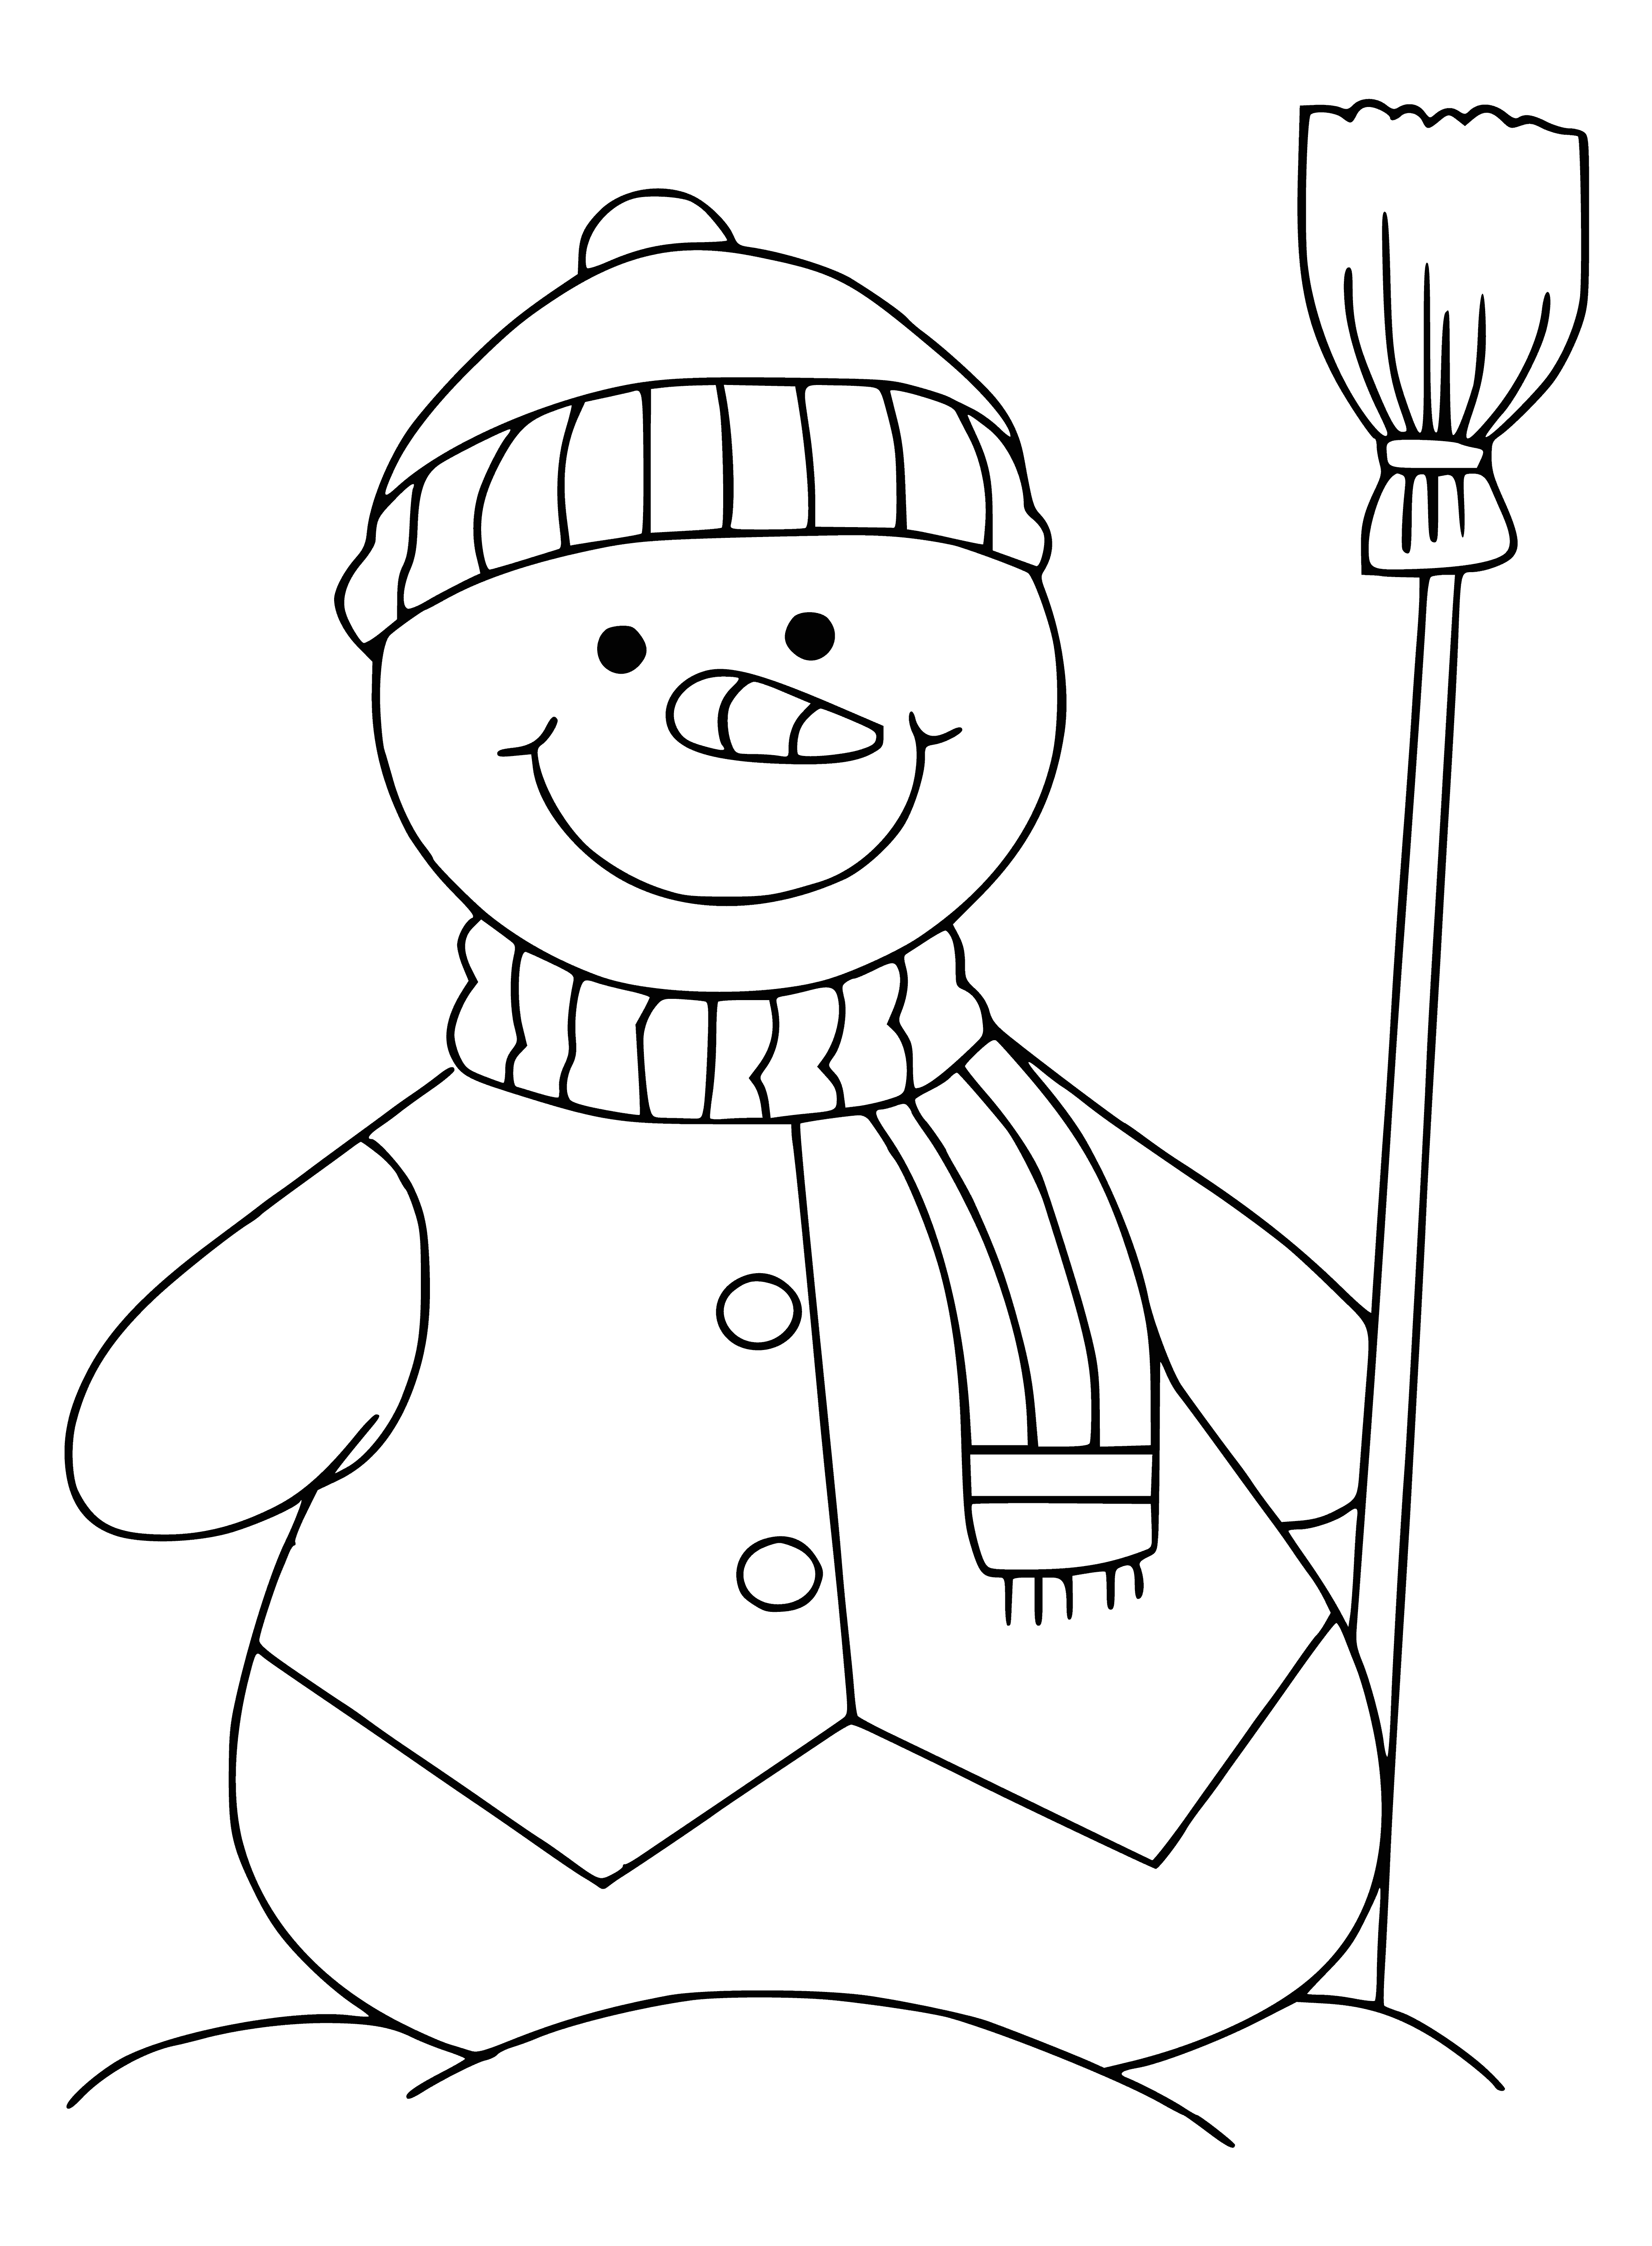 Happy snowman with a large smile, arms outstretched, surrounded by a snowman-like scene. #snowman #snowscene